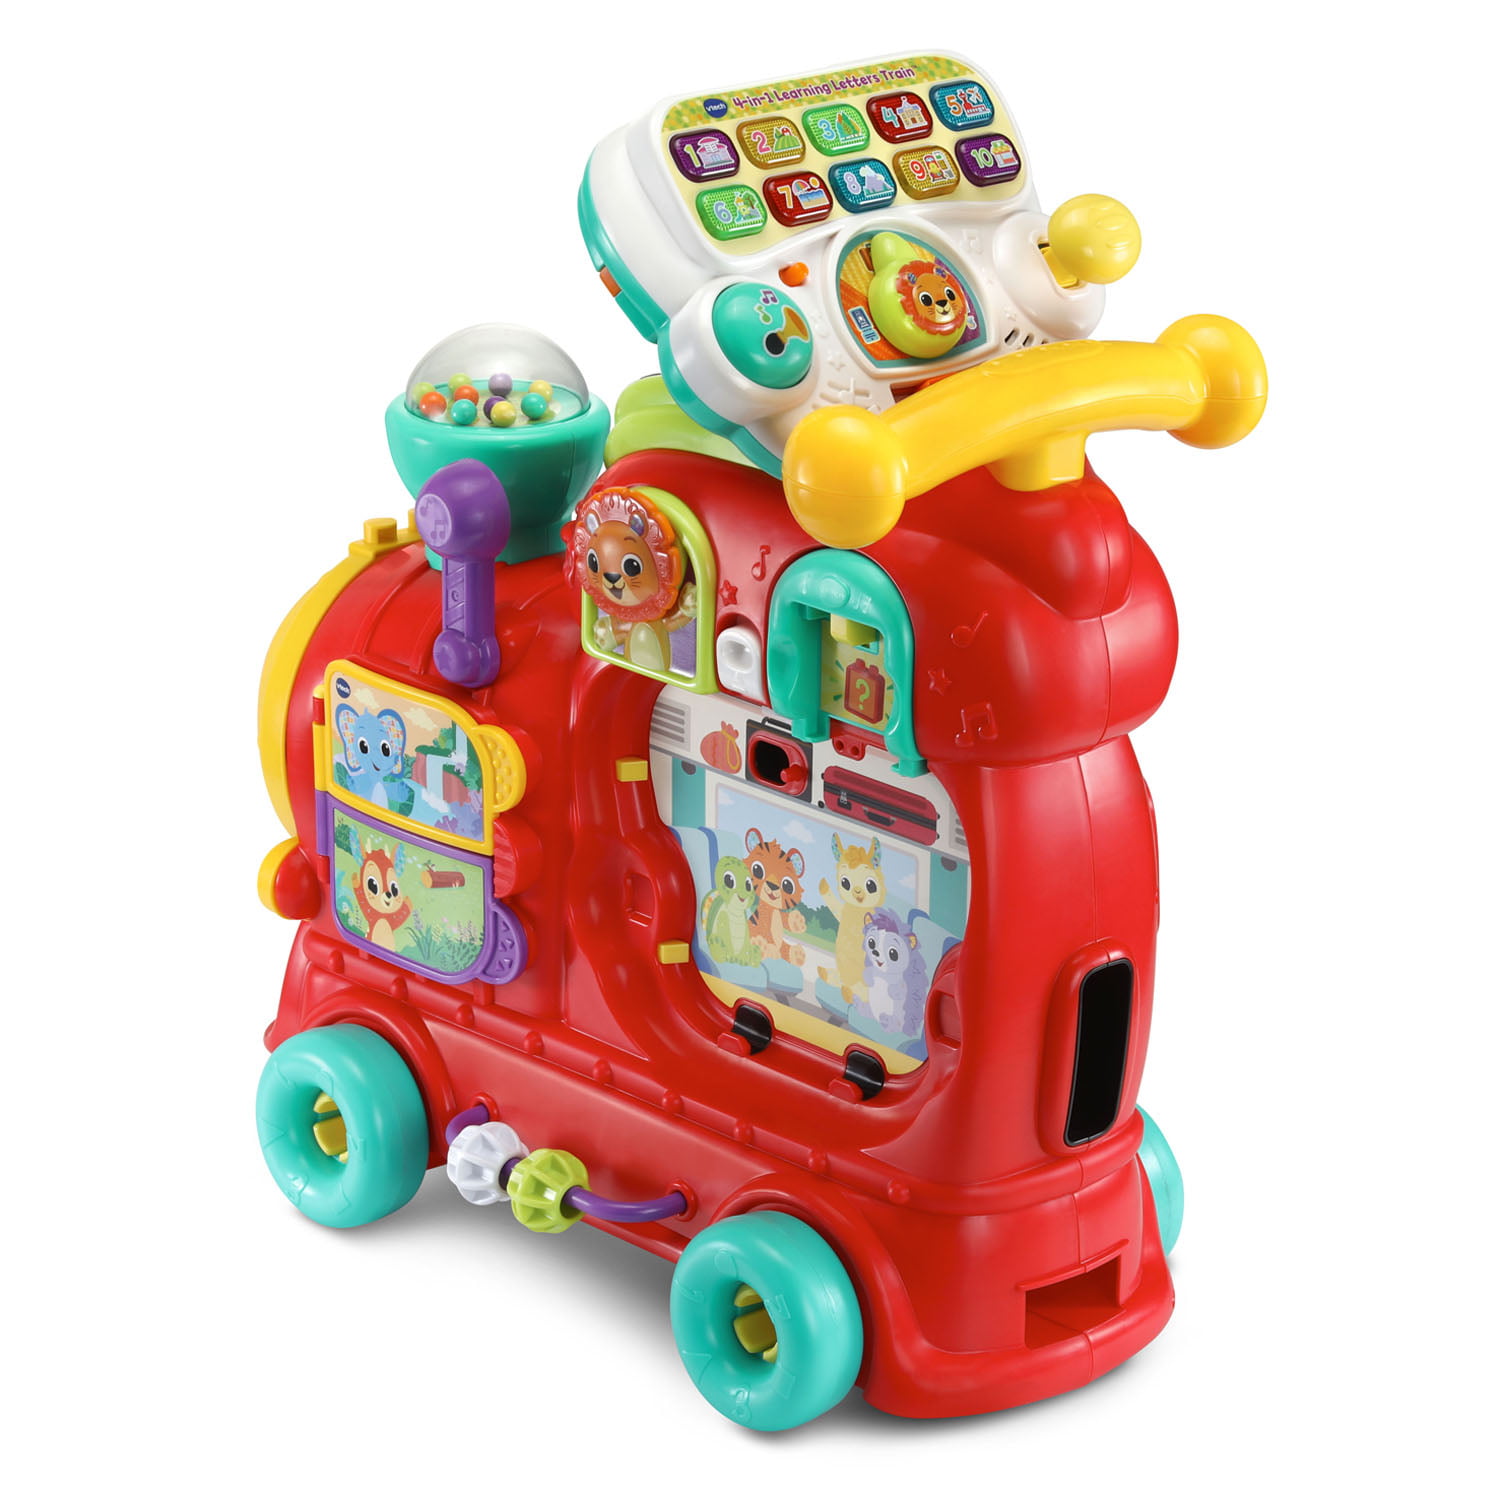 Kids Toys VTech 4 in 1 Baby Walker Push and Ride Alphabet Train Childs Xmas Gift 